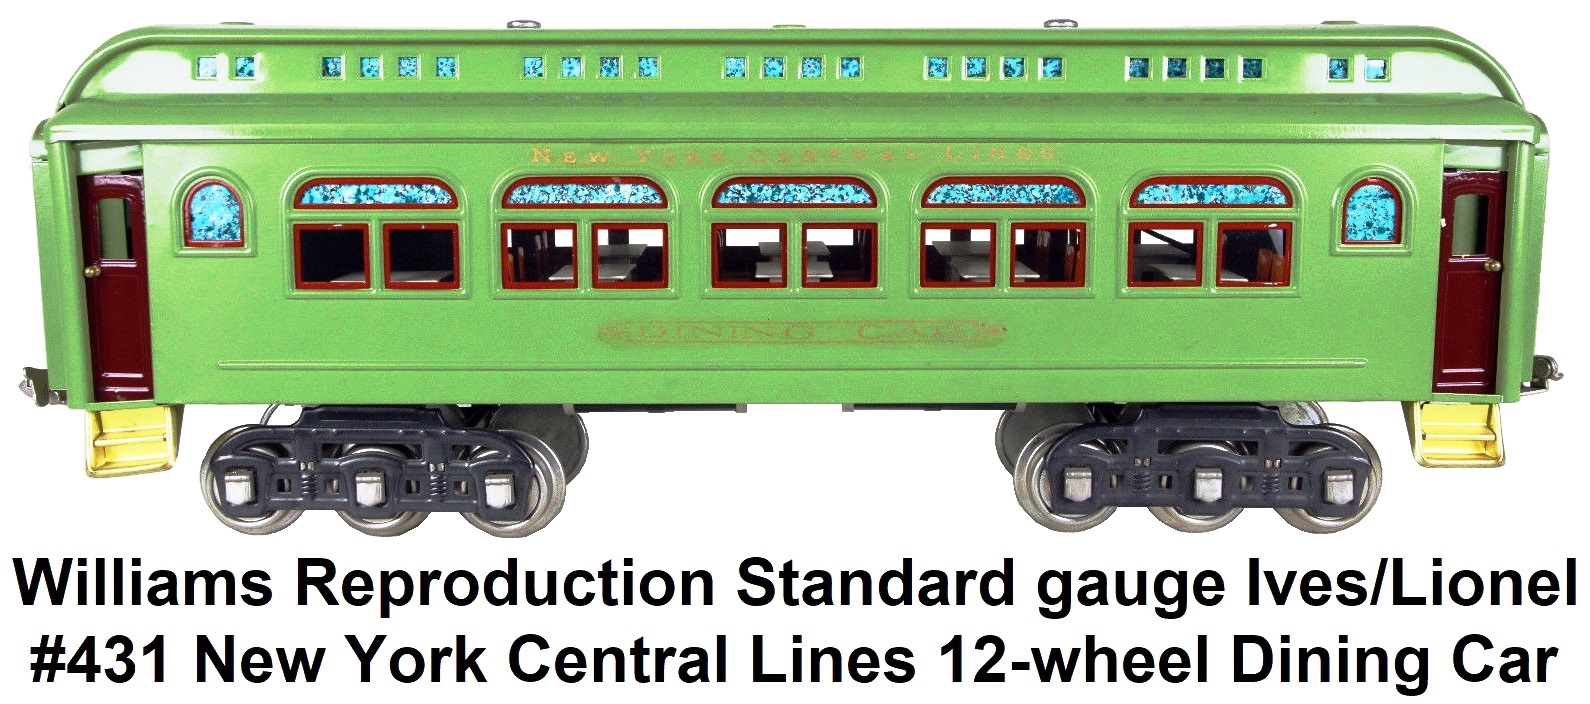 Williams Reproductions Ltd. Standard gauge Ives/Lionel #431 New York Central Lines 12-wheel Dining Car in apple green